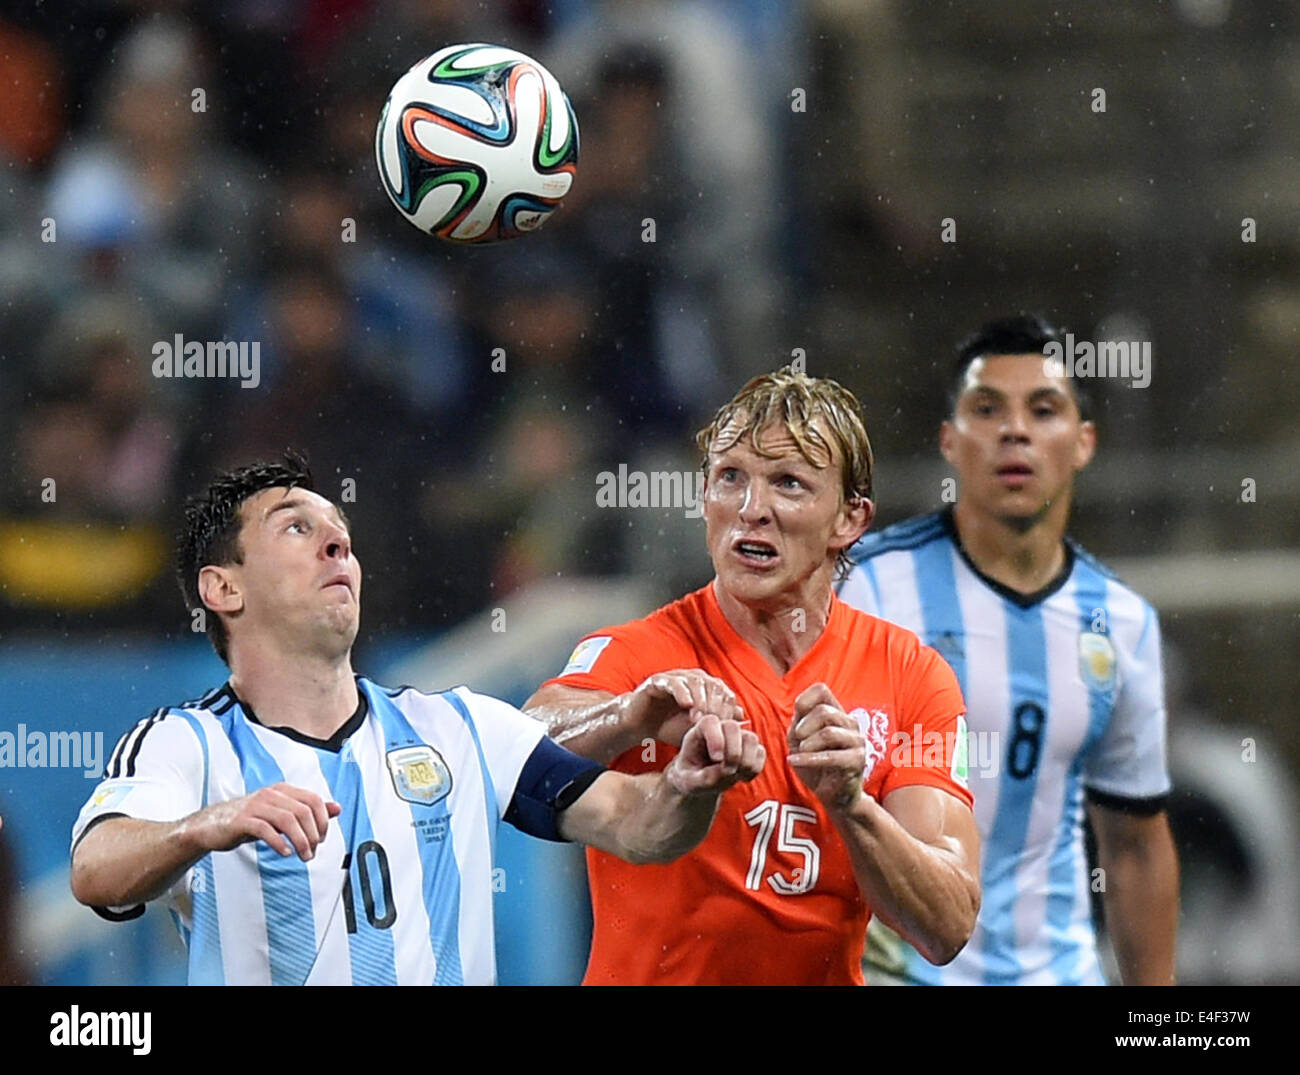 Sao Paulo, Brazil. 09th July, 2014. Lionel Messi (L) of Argentina and Dirk Kuijt (C) of the Netherlands vie for the ball during the FIFA World Cup 2014 semi-final soccer match between the Netherlands and Argentina at the Arena Corinthians in Sao Paulo, Brazil, 09 July 2014. Photo: Marius Becker/dpa/Alamy Live News Stock Photo